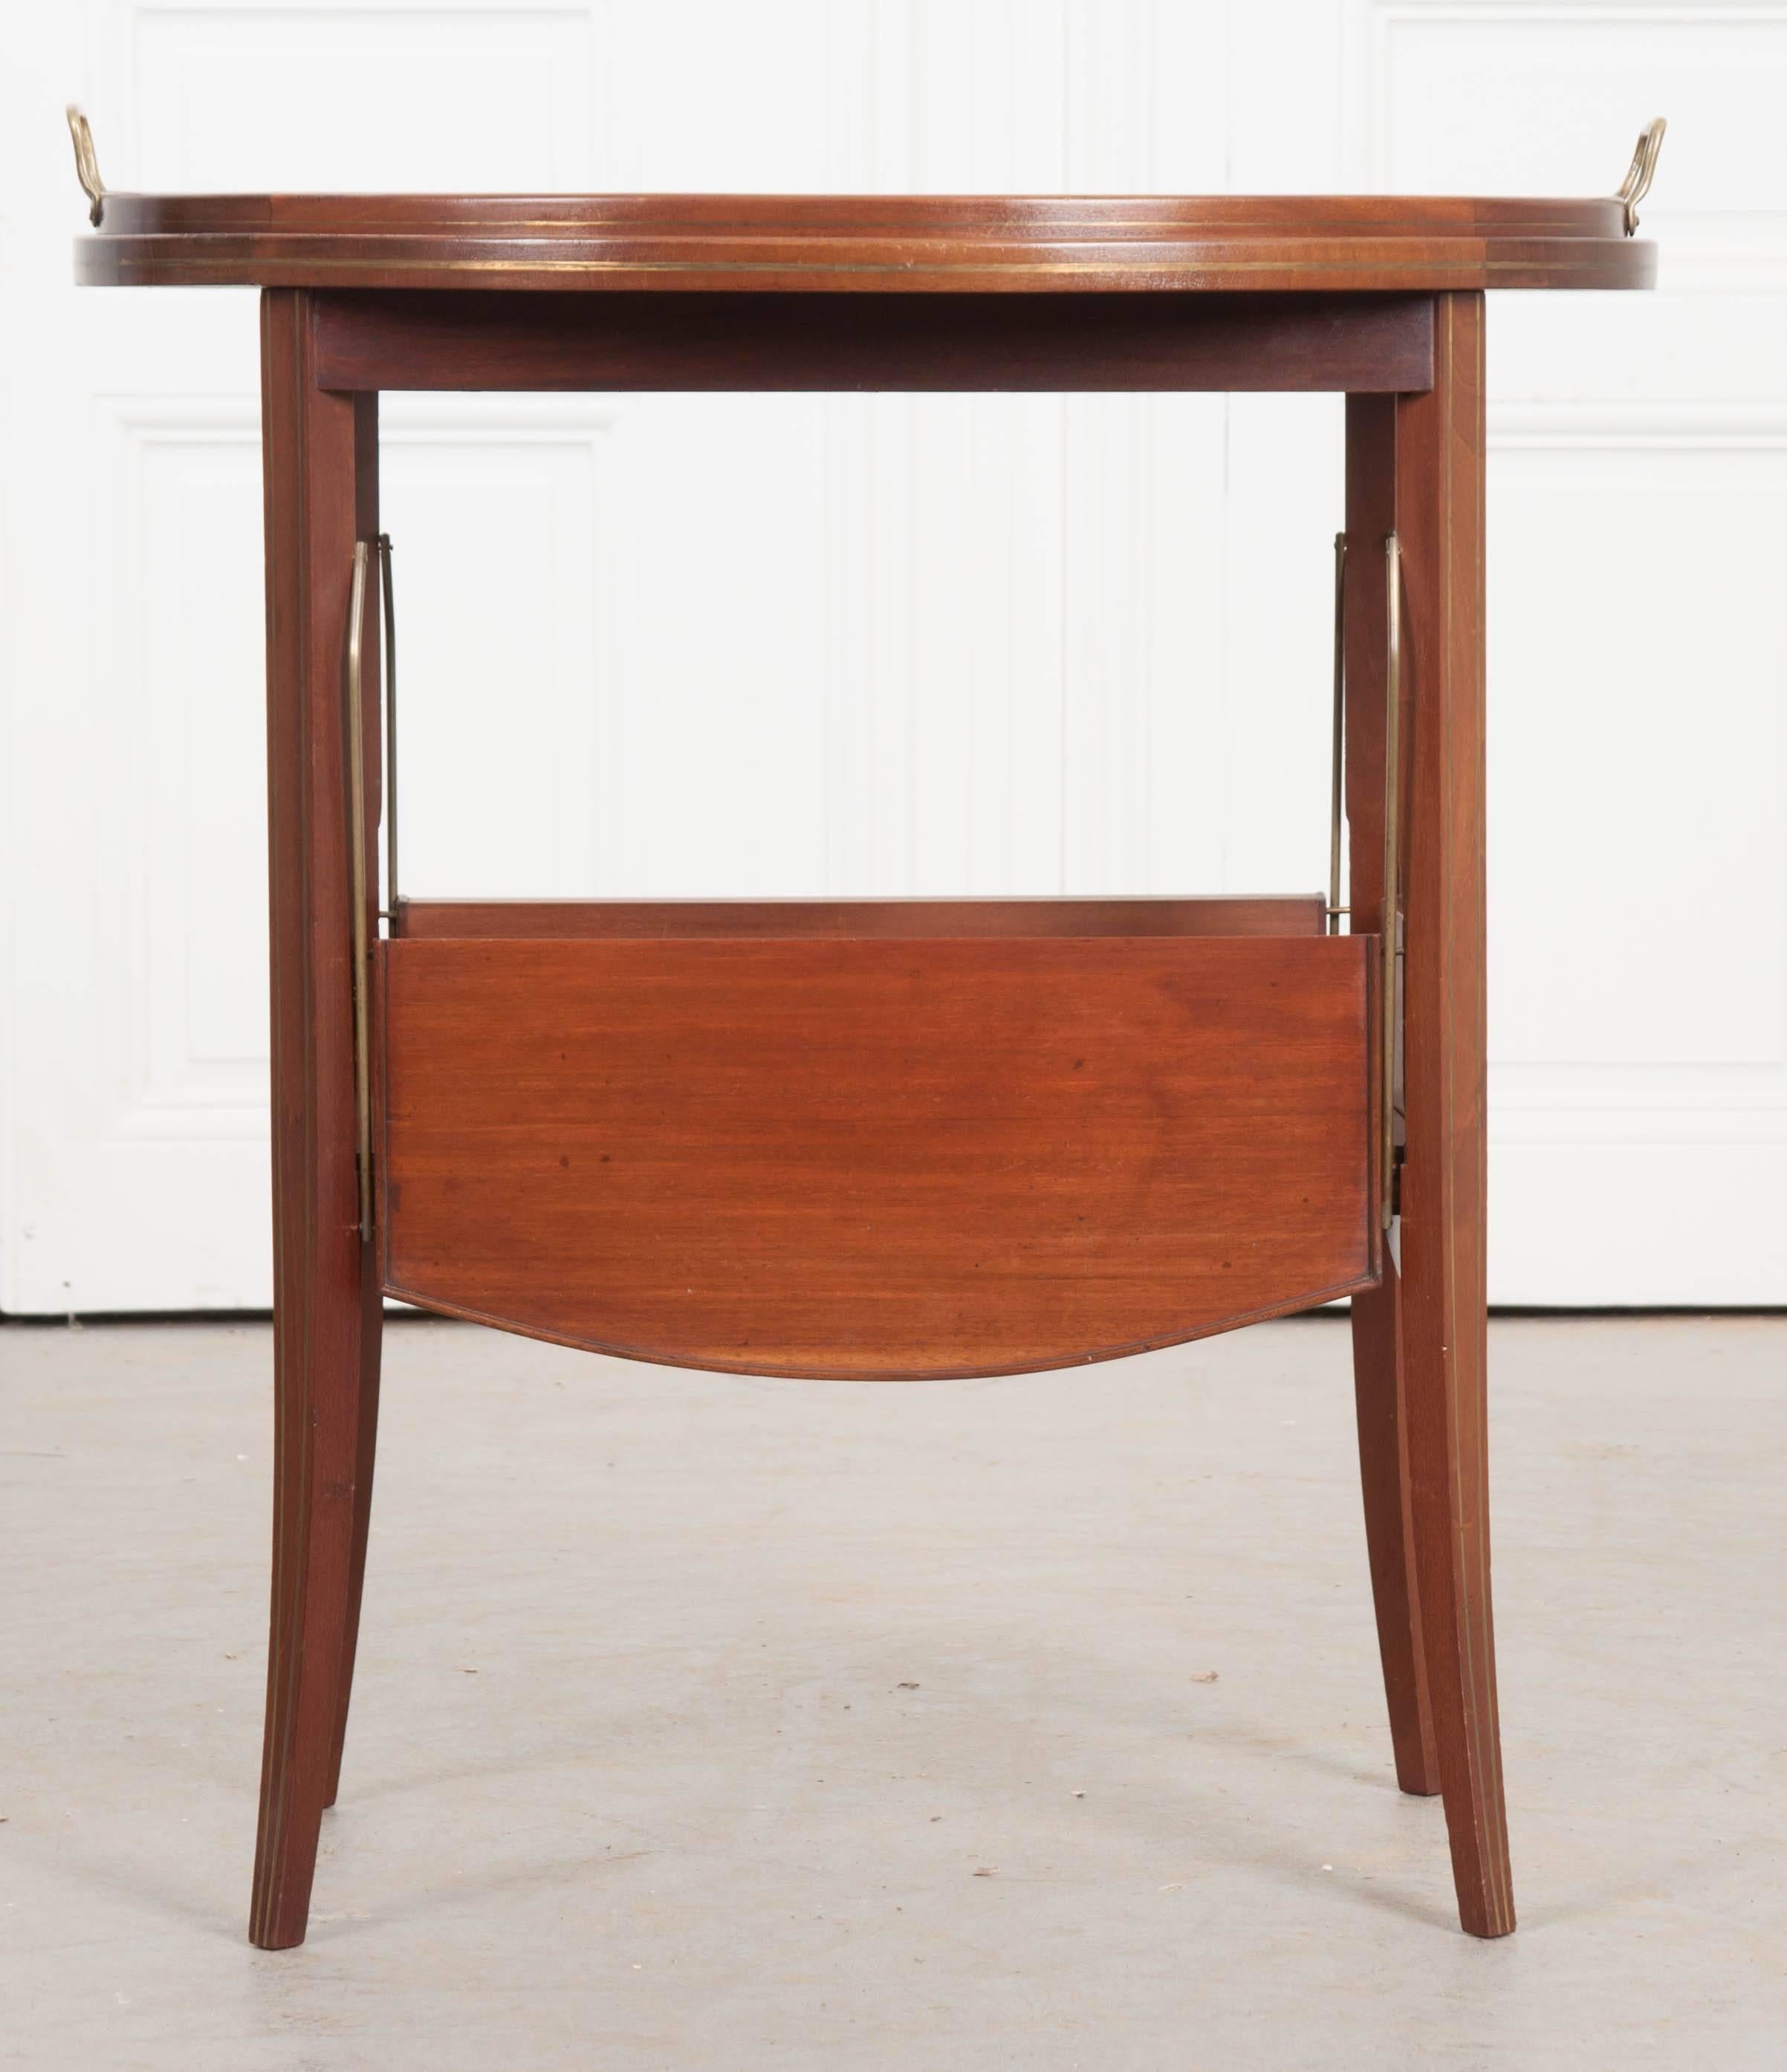 A wonderful mahogany tea table, circa 1910 from France. This early 20th century piece is in great antique condition, with the original tray top. This oval glass tray rests in the table’s welled mahogany top and is complete with brass handles. The